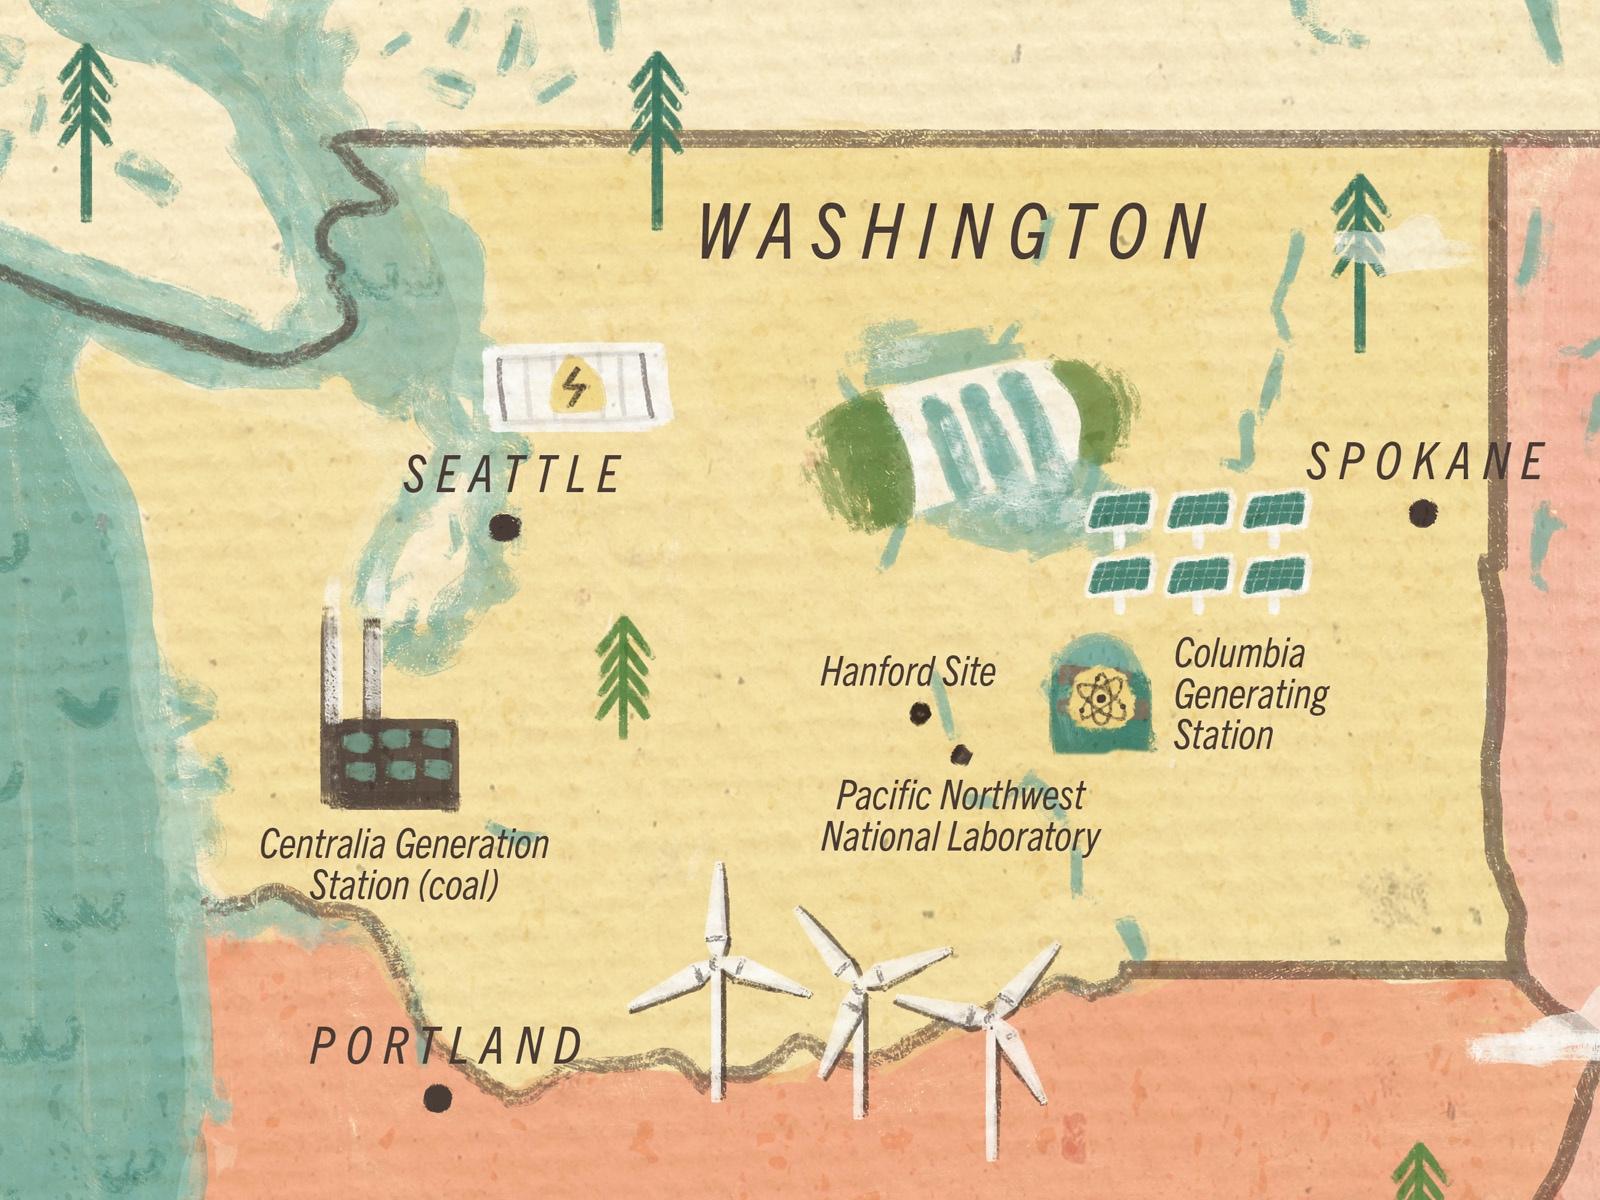 This illustrated map of Washington state shows the diversity of energy sources, including nuclear, hydro, solar, wind, and coal, plus energy storage